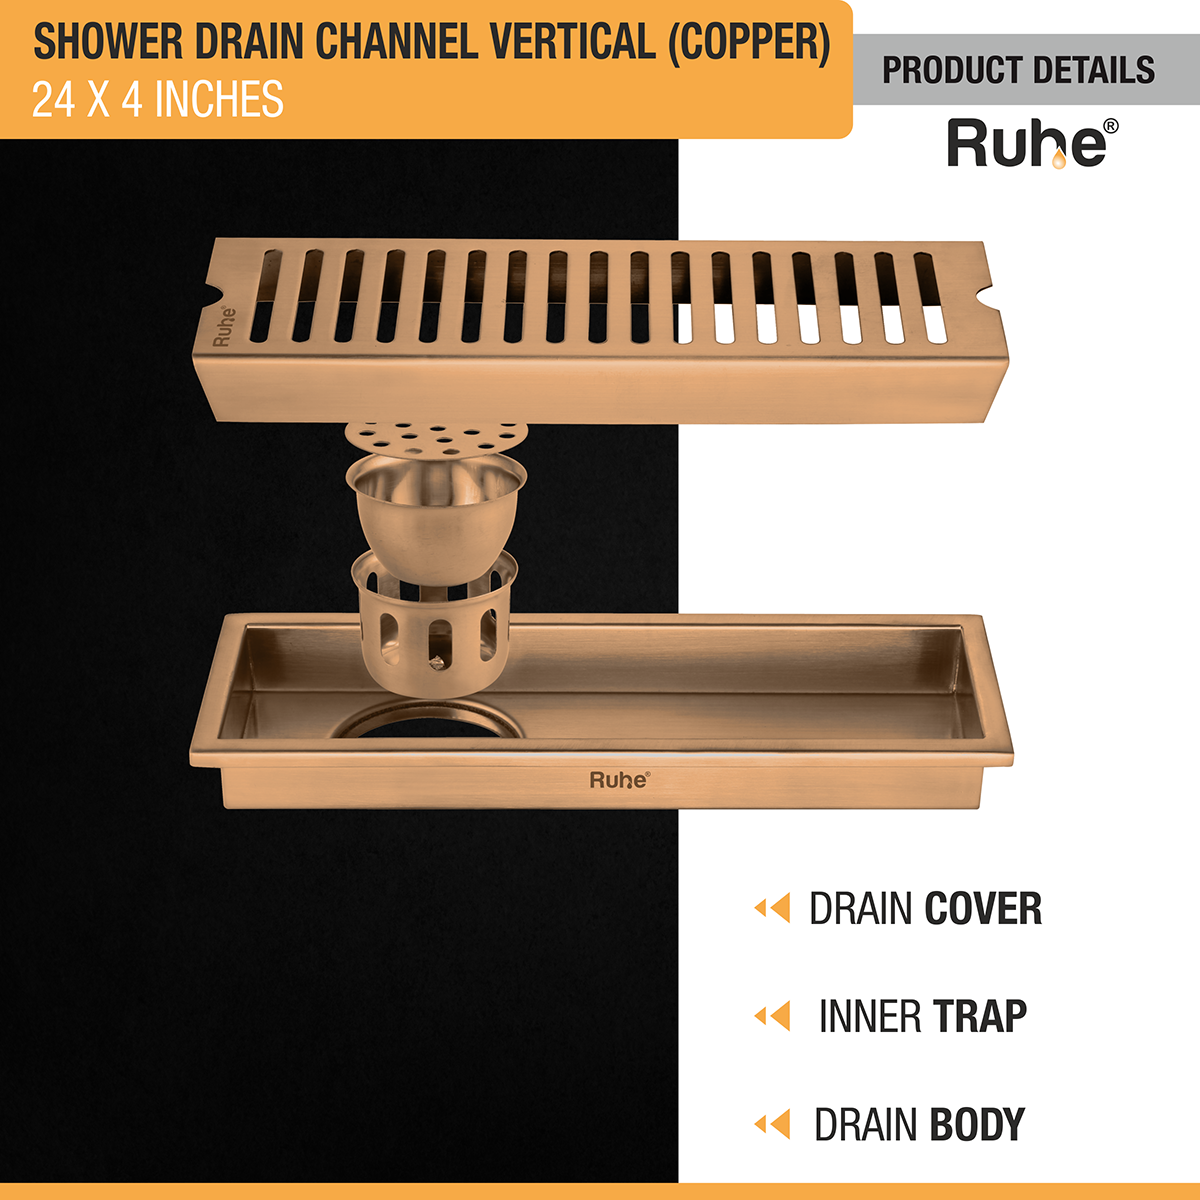 Vertical Shower Drain Channel (24 x 4 Inches) ROSE GOLD/ANTIQUE COPPER product details